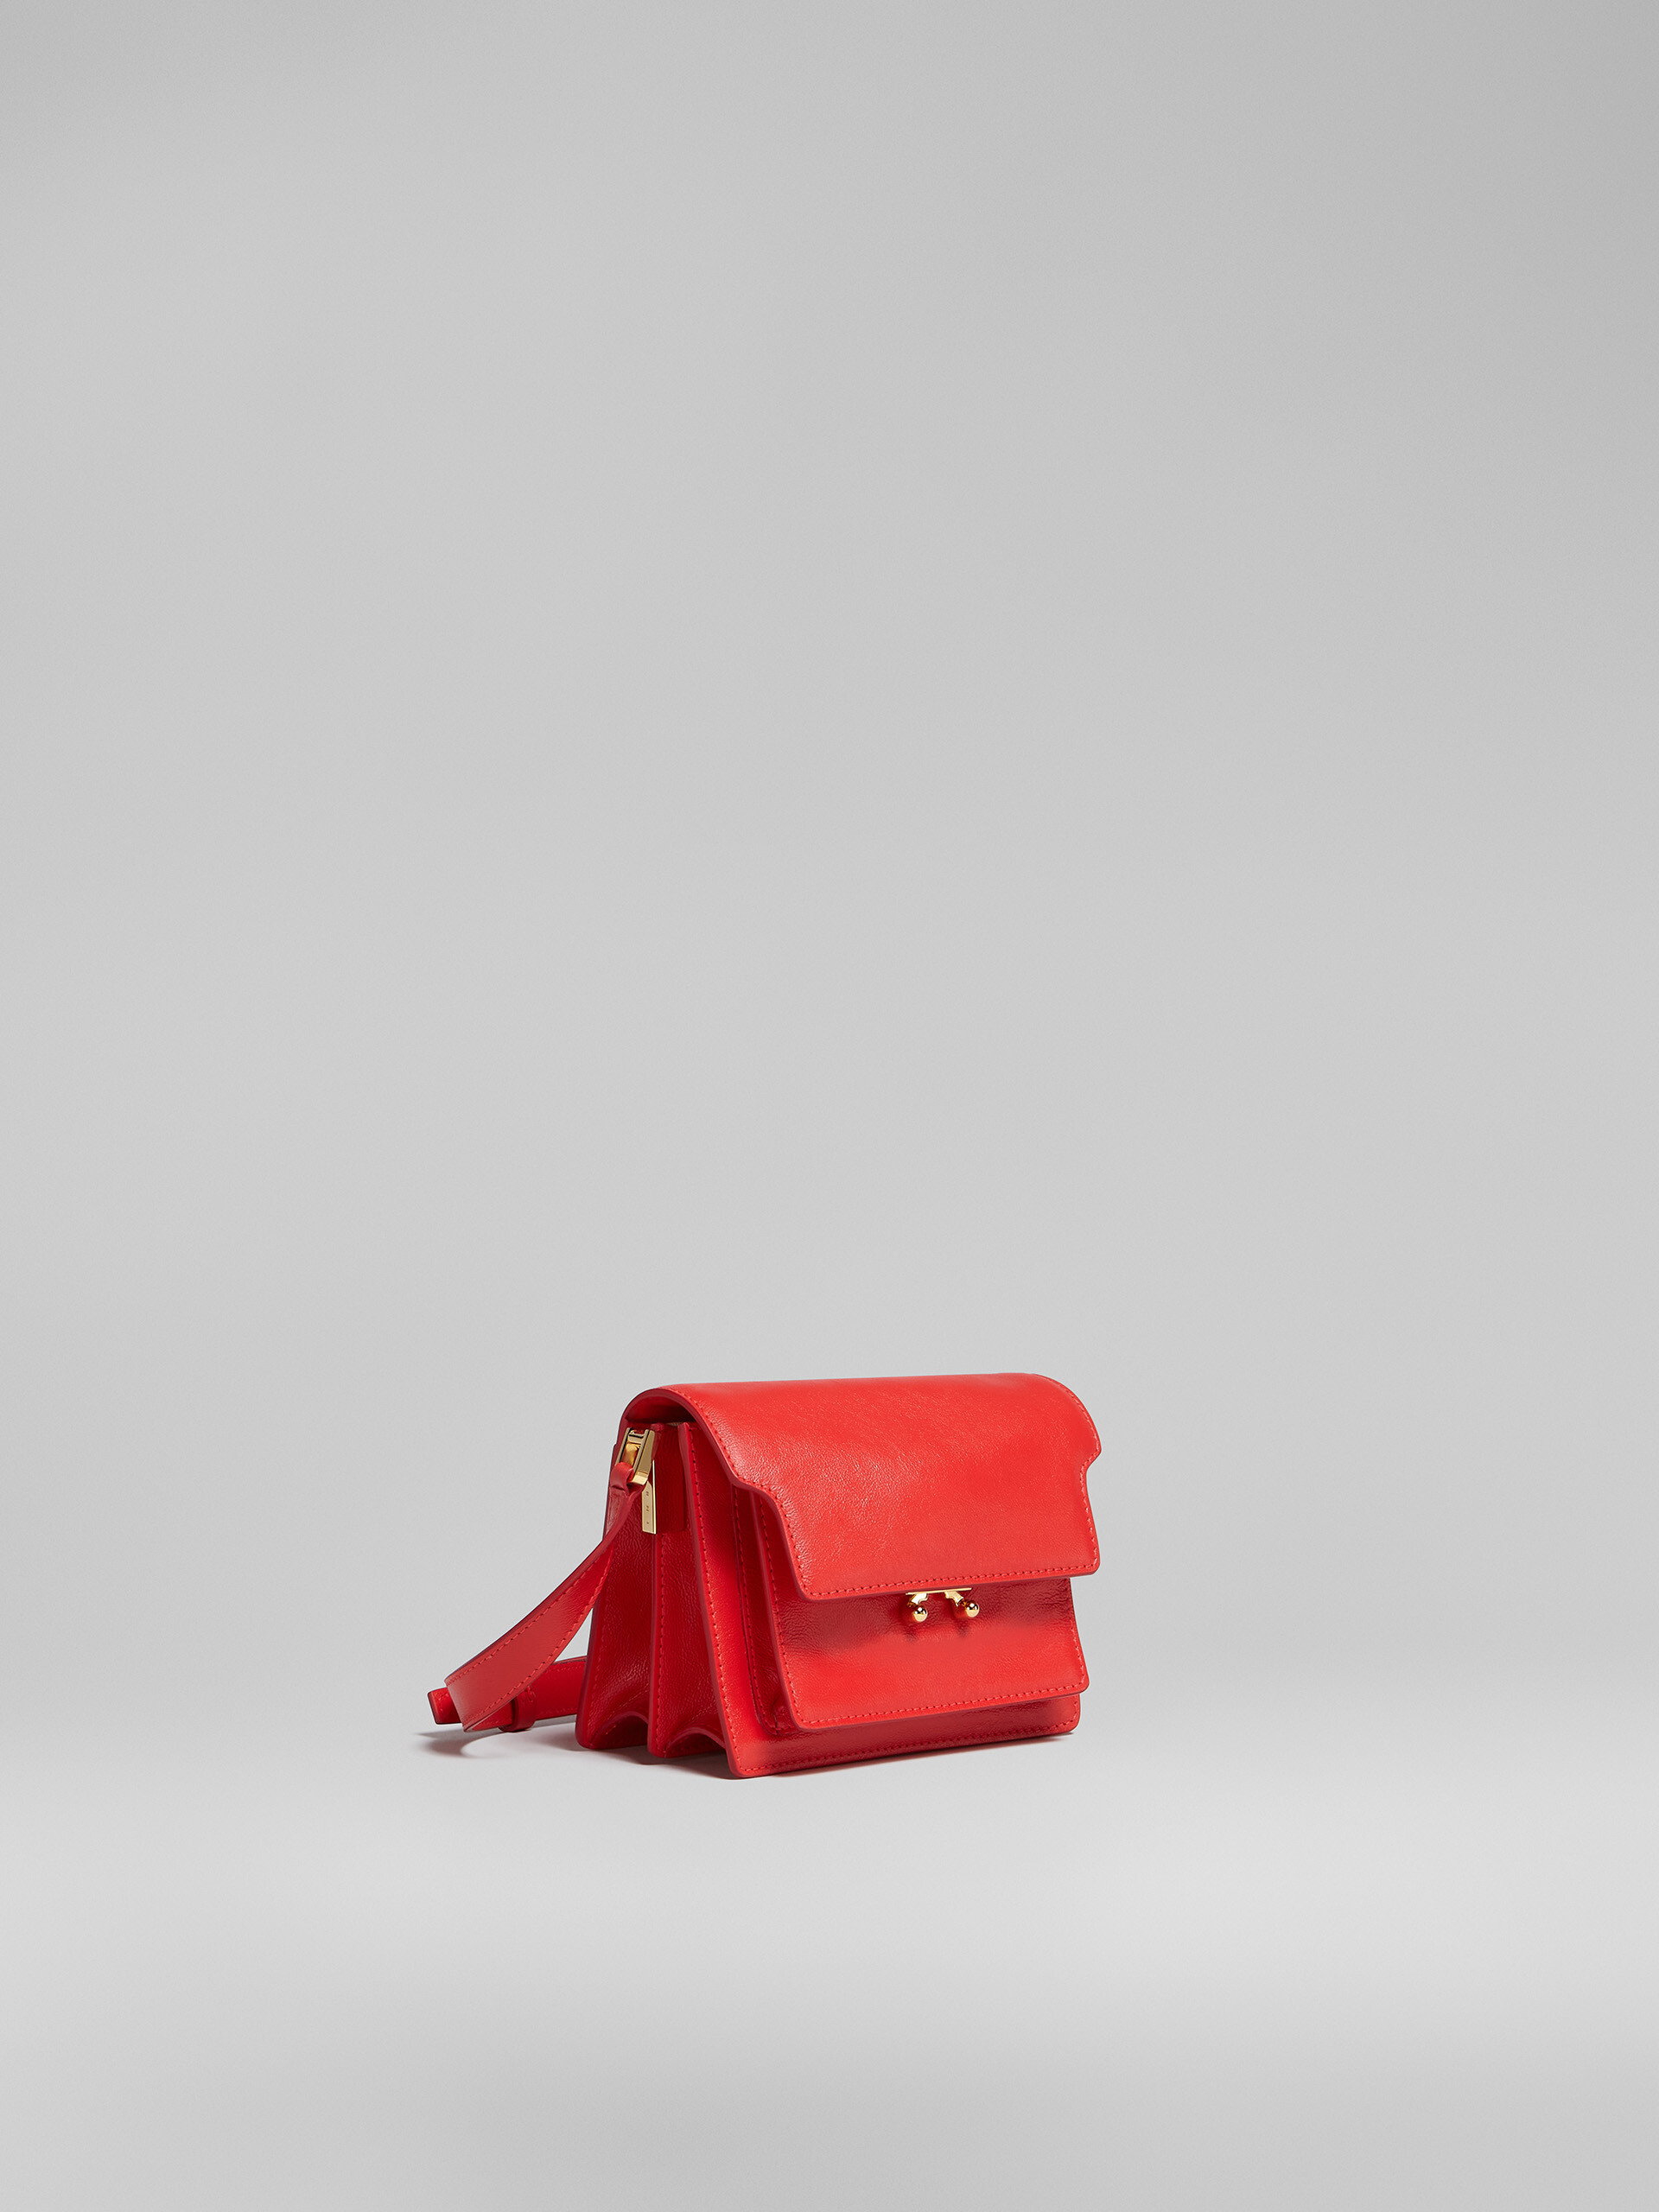 TRUNK SOFT mini bag in red leather - Shoulder Bags - Image 6